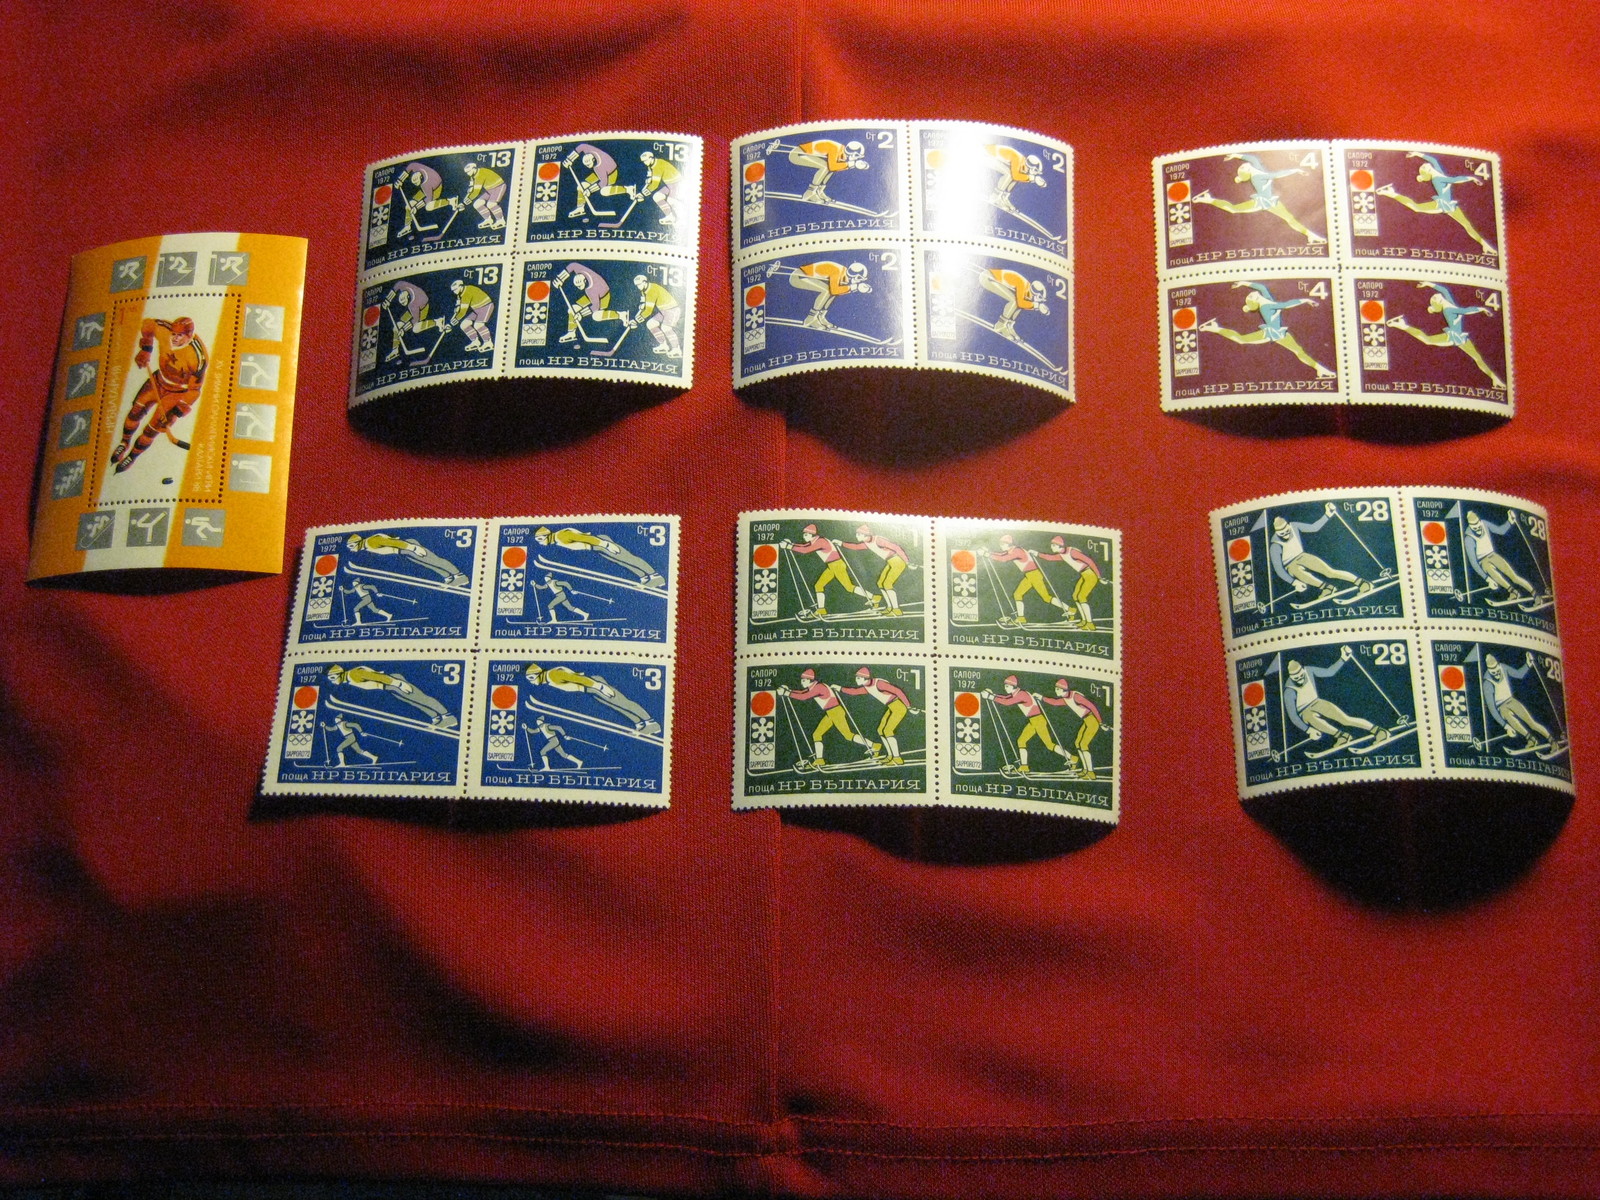 Winter Olympic stamp collection - $50.00